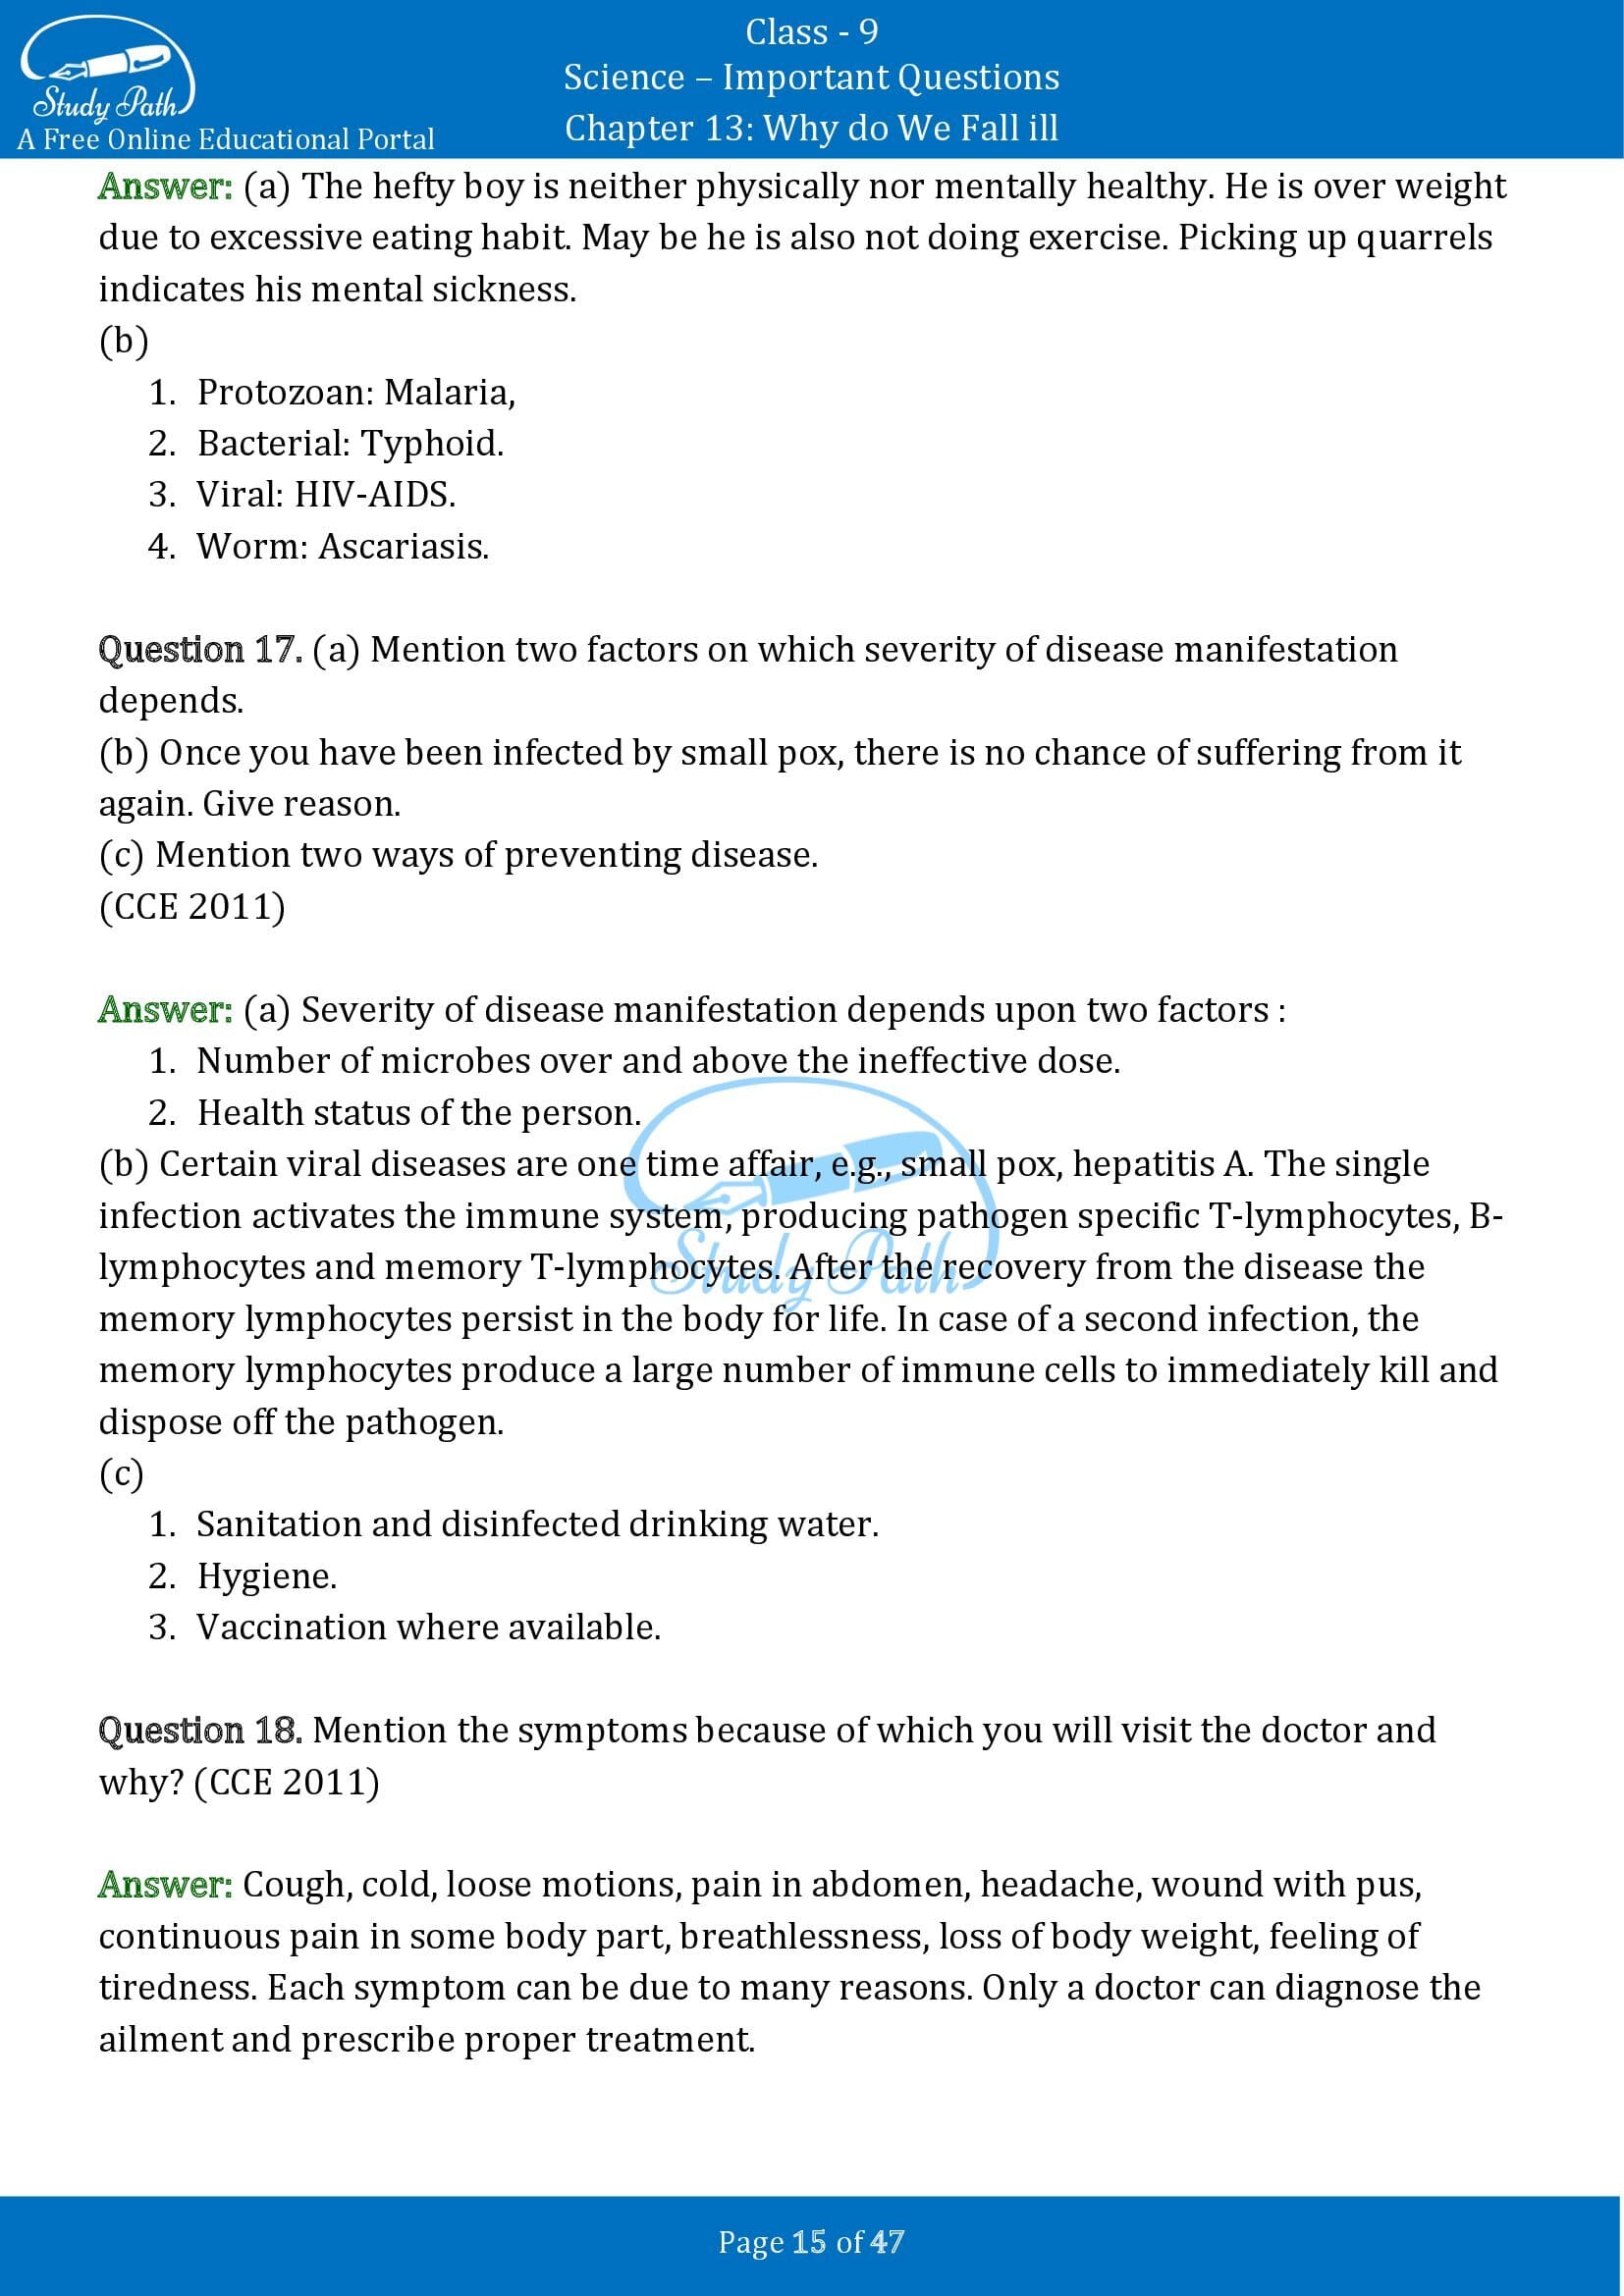 Important Questions for Class 9 Science Chapter 13 Why do We Fall ill 00015